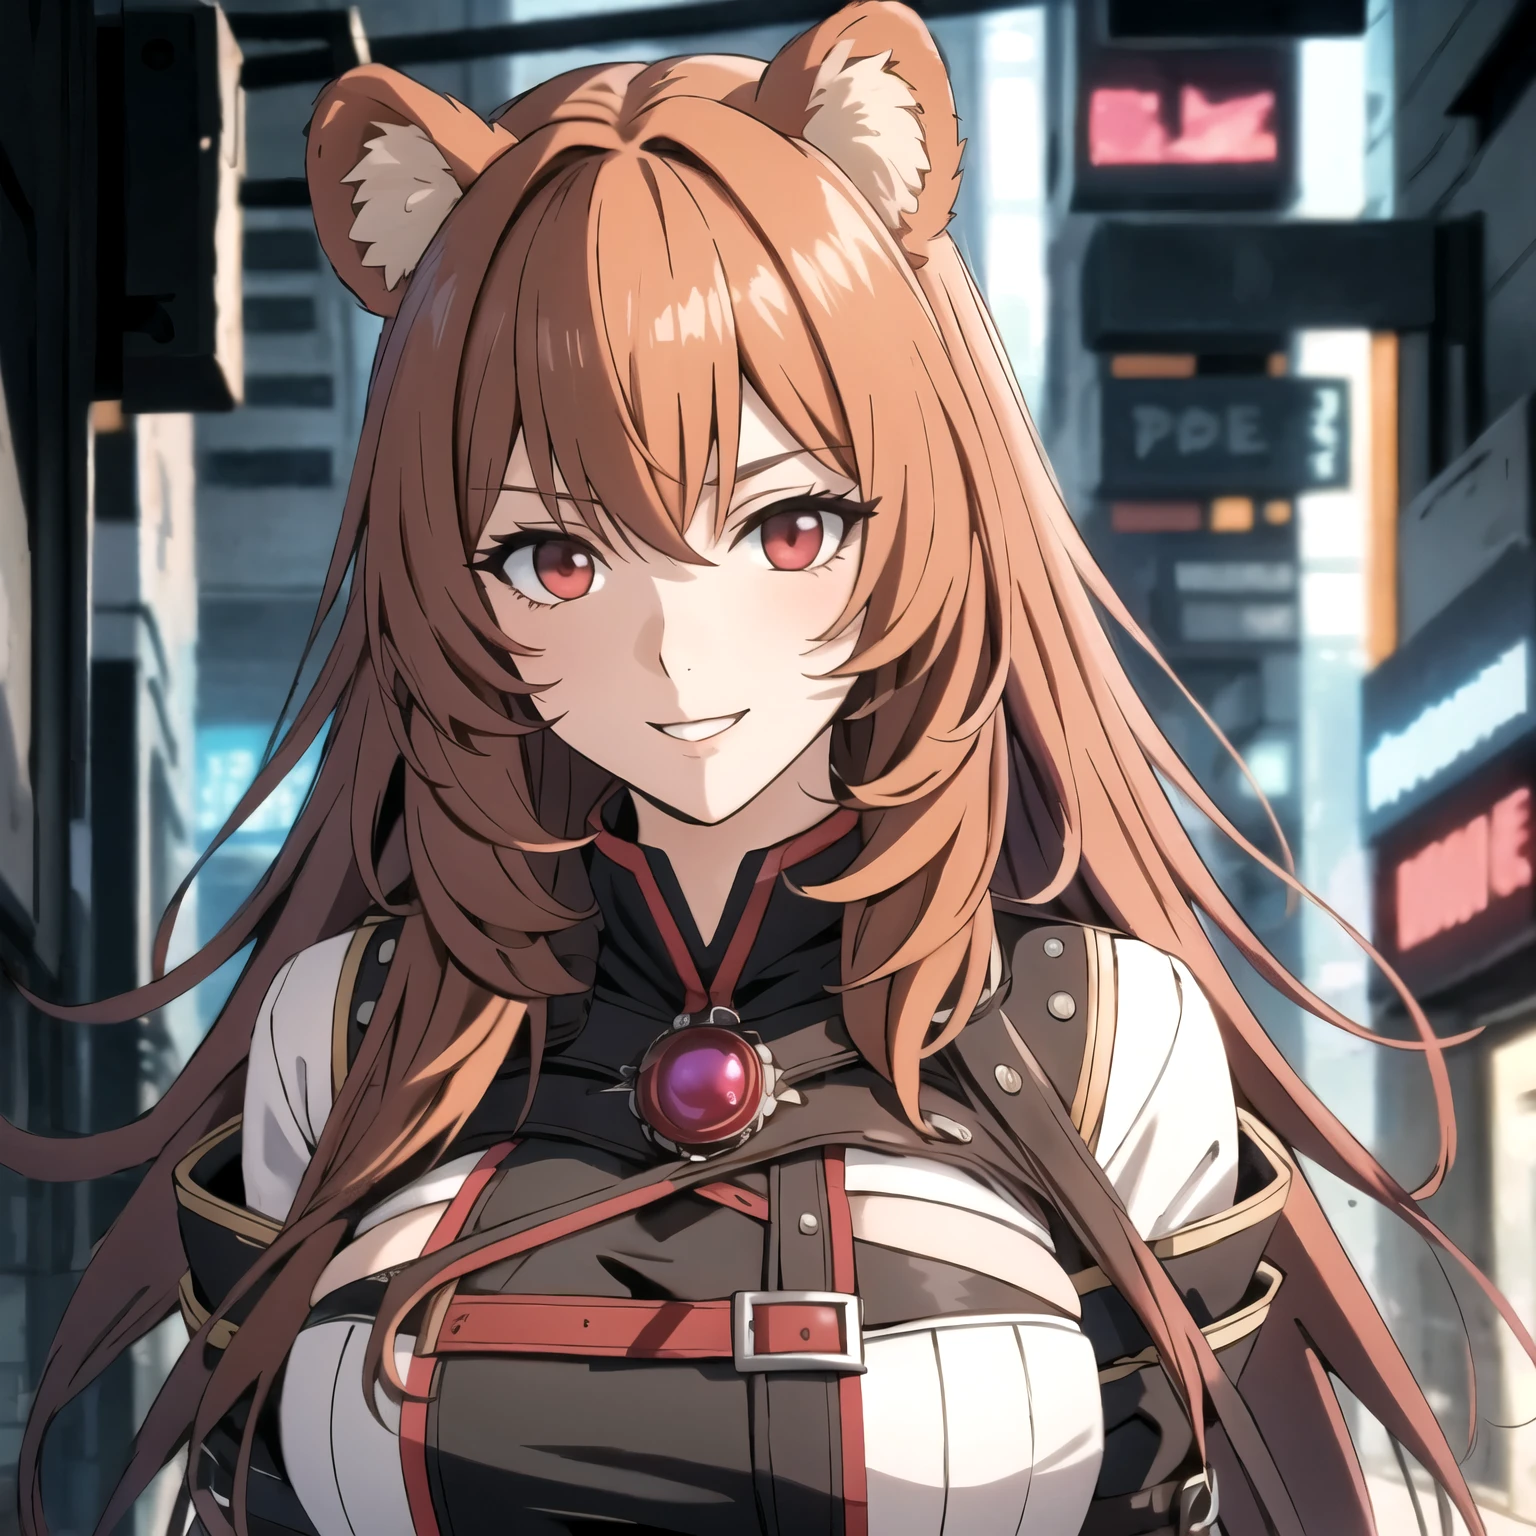 Raphtalia attractive woman. bear ears, orange blonde hair, red eyes like rubies, open mouth smile, blush, big breasts, neckline .short cyberpunk style clothes,  neon buildings background .